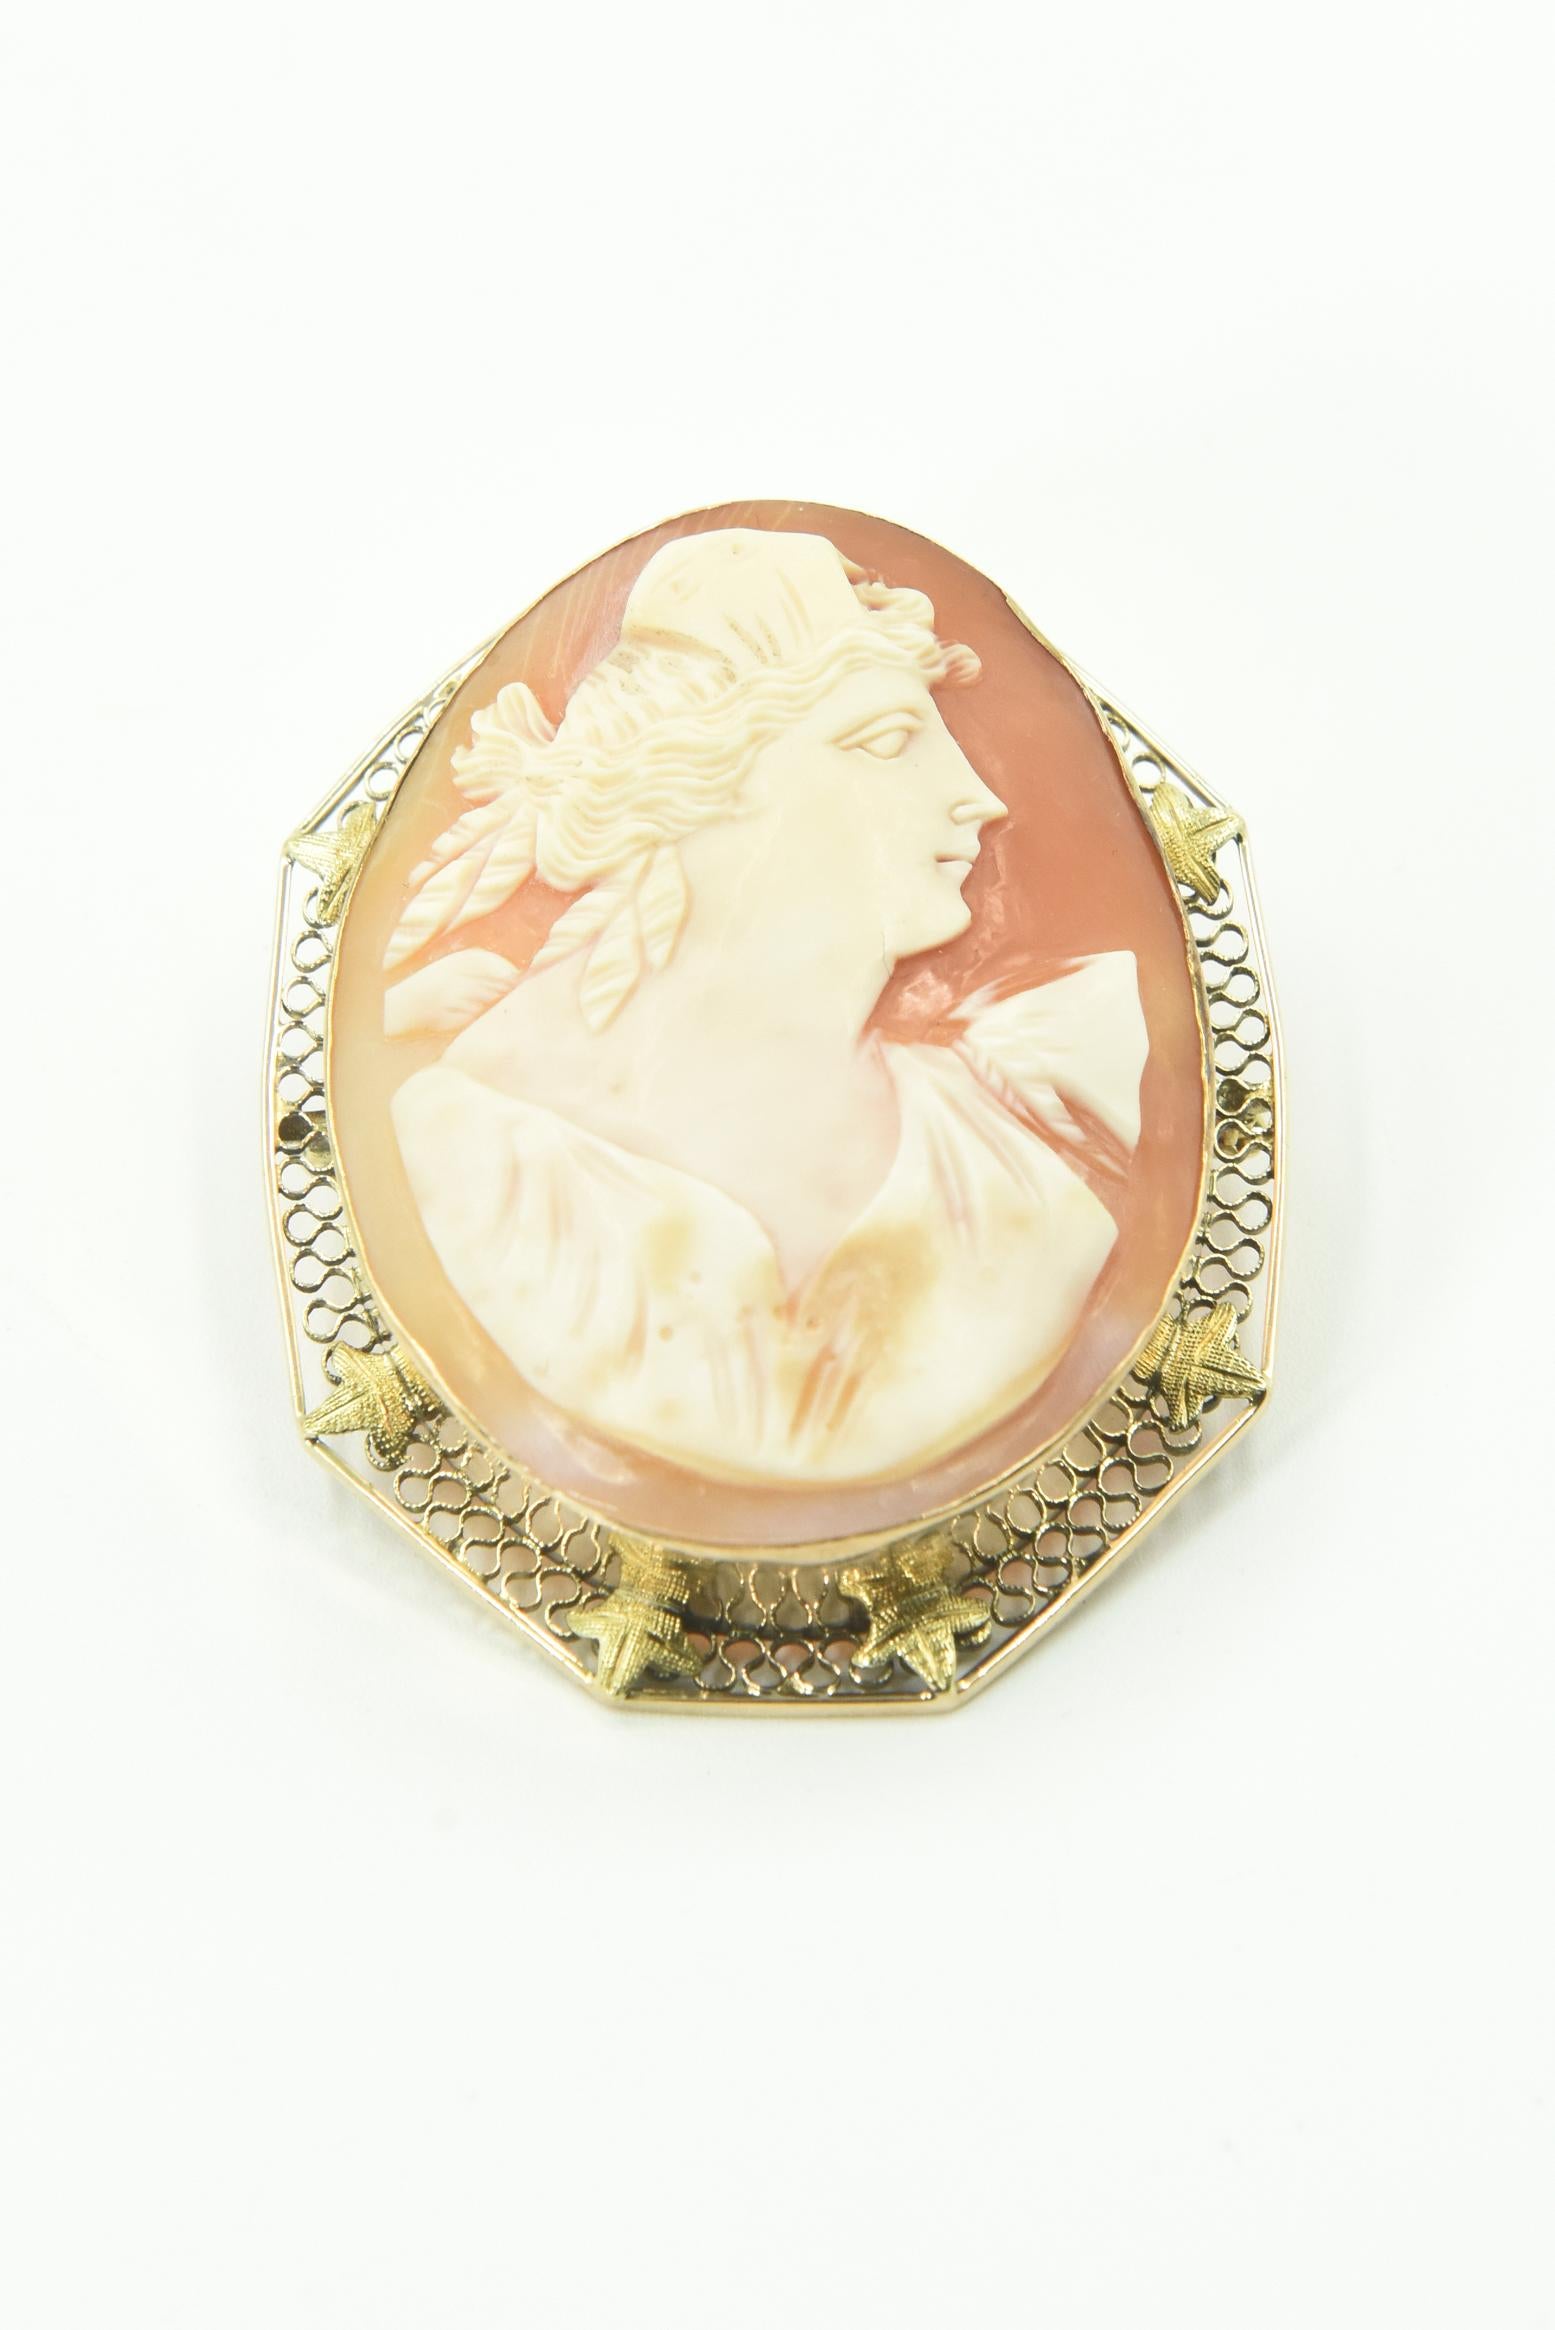 Victorian shell cameo Roman woman portrait hand carved & mounted into a 14k gold brooch pendant.  The frame work is traditional filigree, with lovely, detailed leaves surrounding the solid bezel frame. The cameo itself is perfectly carved, a lady in